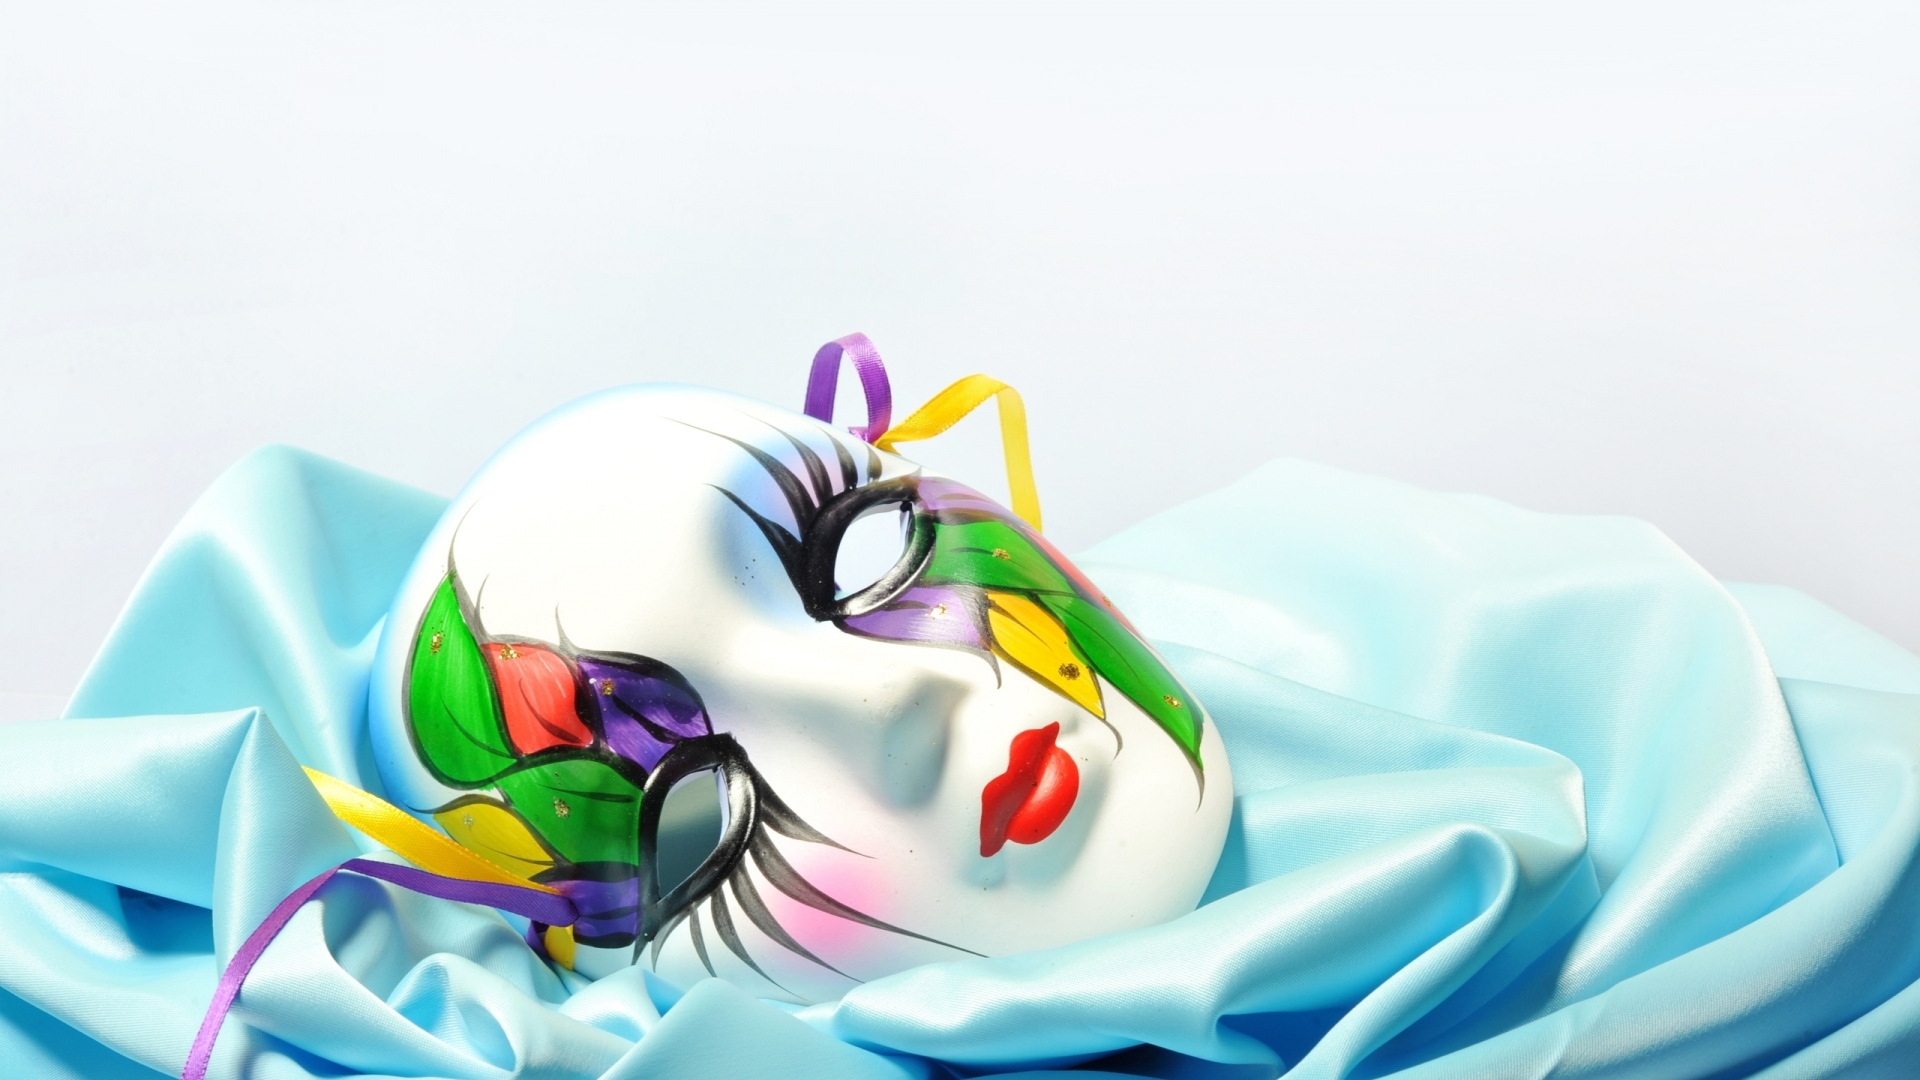 Lady Mask for 1920 x 1080 HDTV 1080p resolution